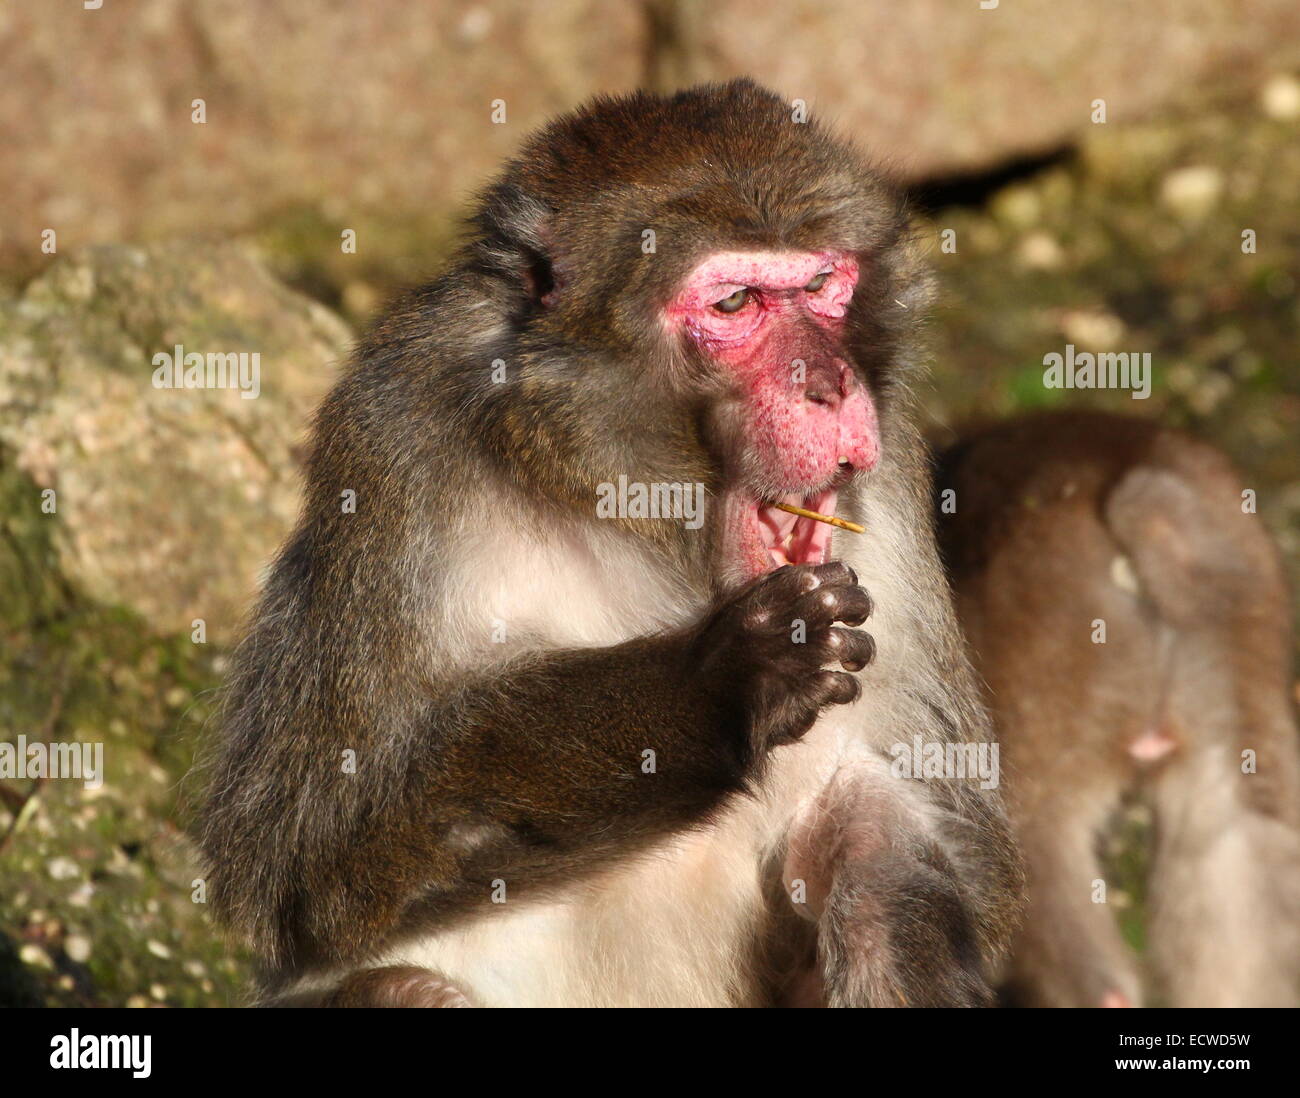 Japanese macaque or Snow monkey (Macaca fuscata) chewing on a stick Stock Photo